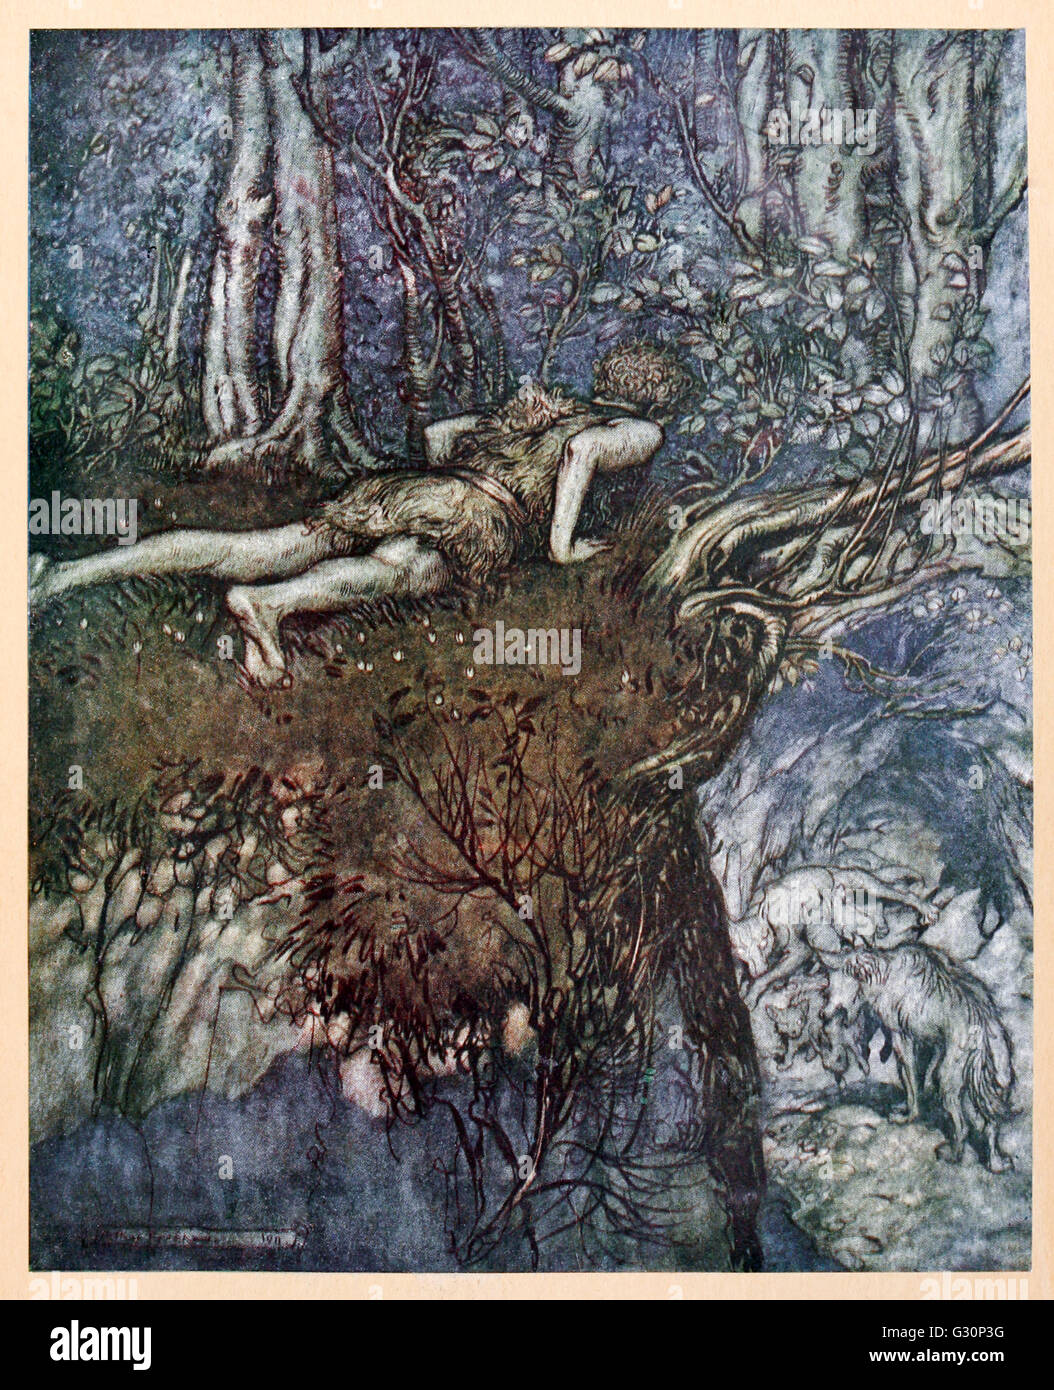 “And there I learnt what love was like” from 'Siegfried & The Twilight of the Gods' illustrated by Arthur Rackham (1867-1939). See description for more information. Stock Photo